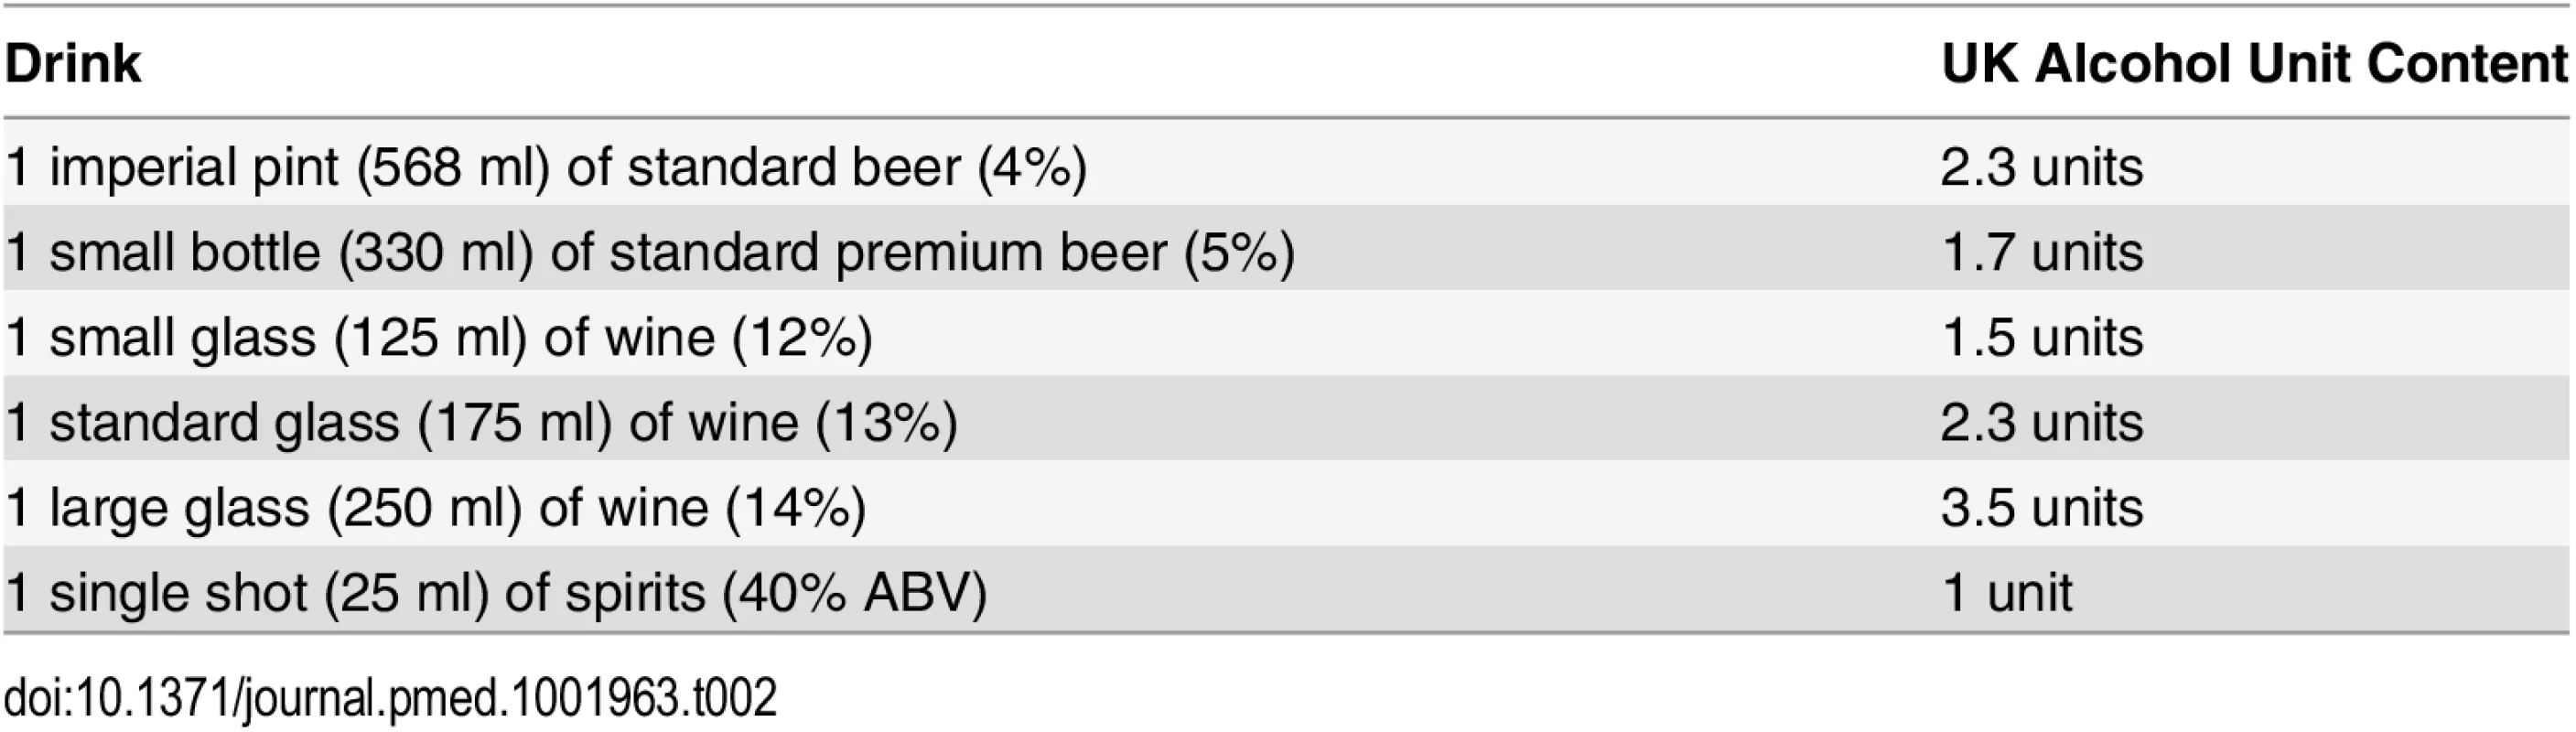 UK alcohol unit content of popular drinks (1 unit = 8 g [10 ml] of pure alcohol).